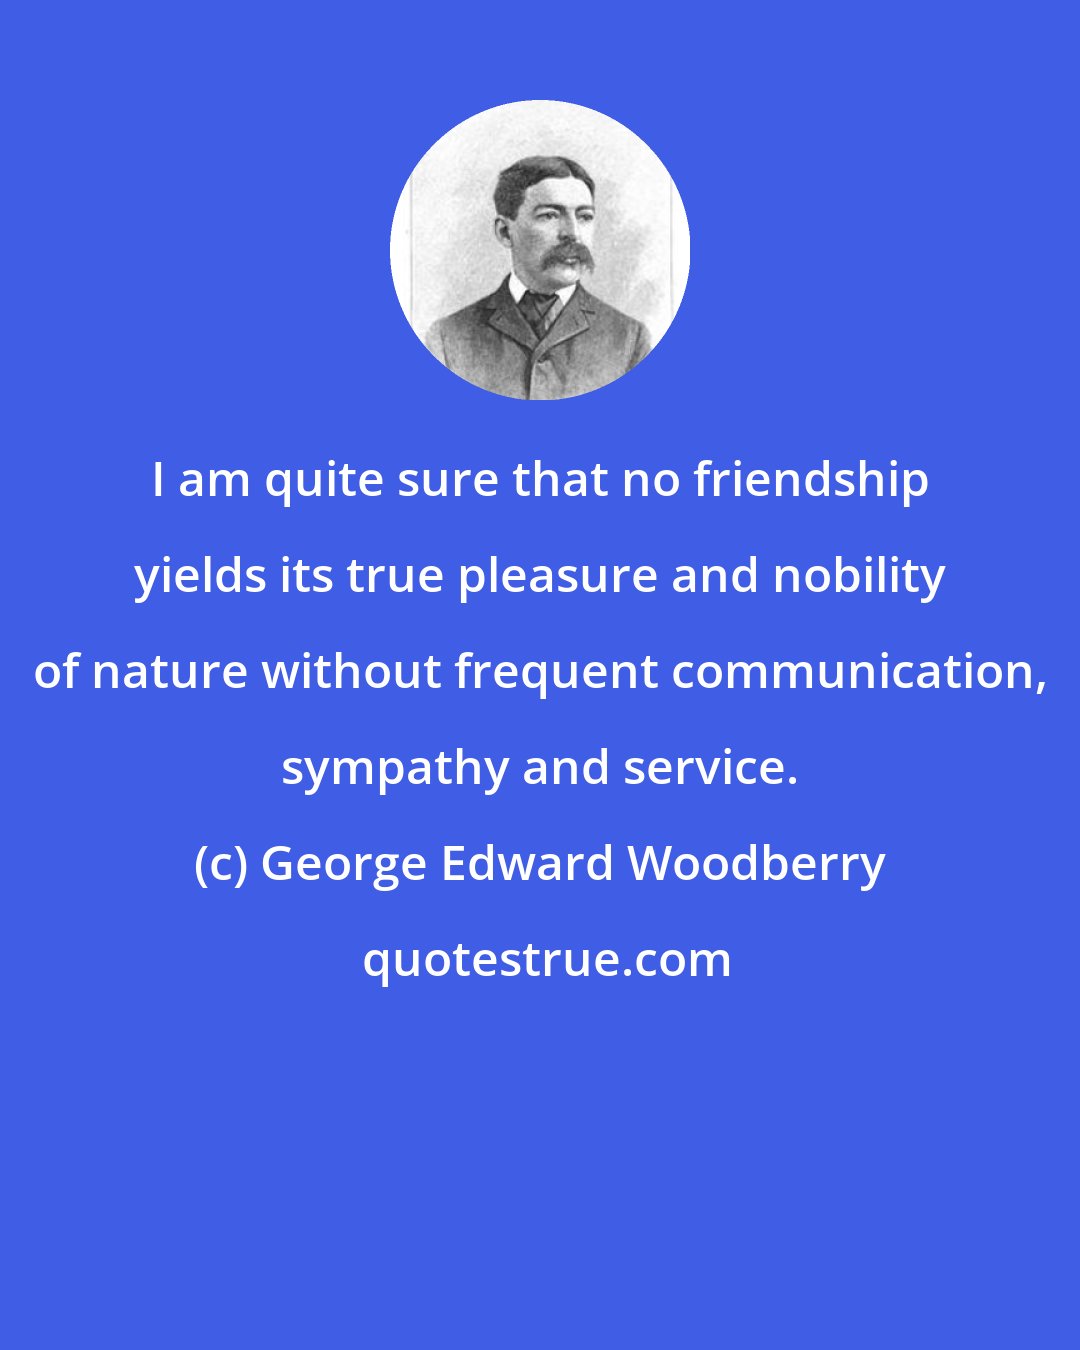 George Edward Woodberry: I am quite sure that no friendship yields its true pleasure and nobility of nature without frequent communication, sympathy and service.